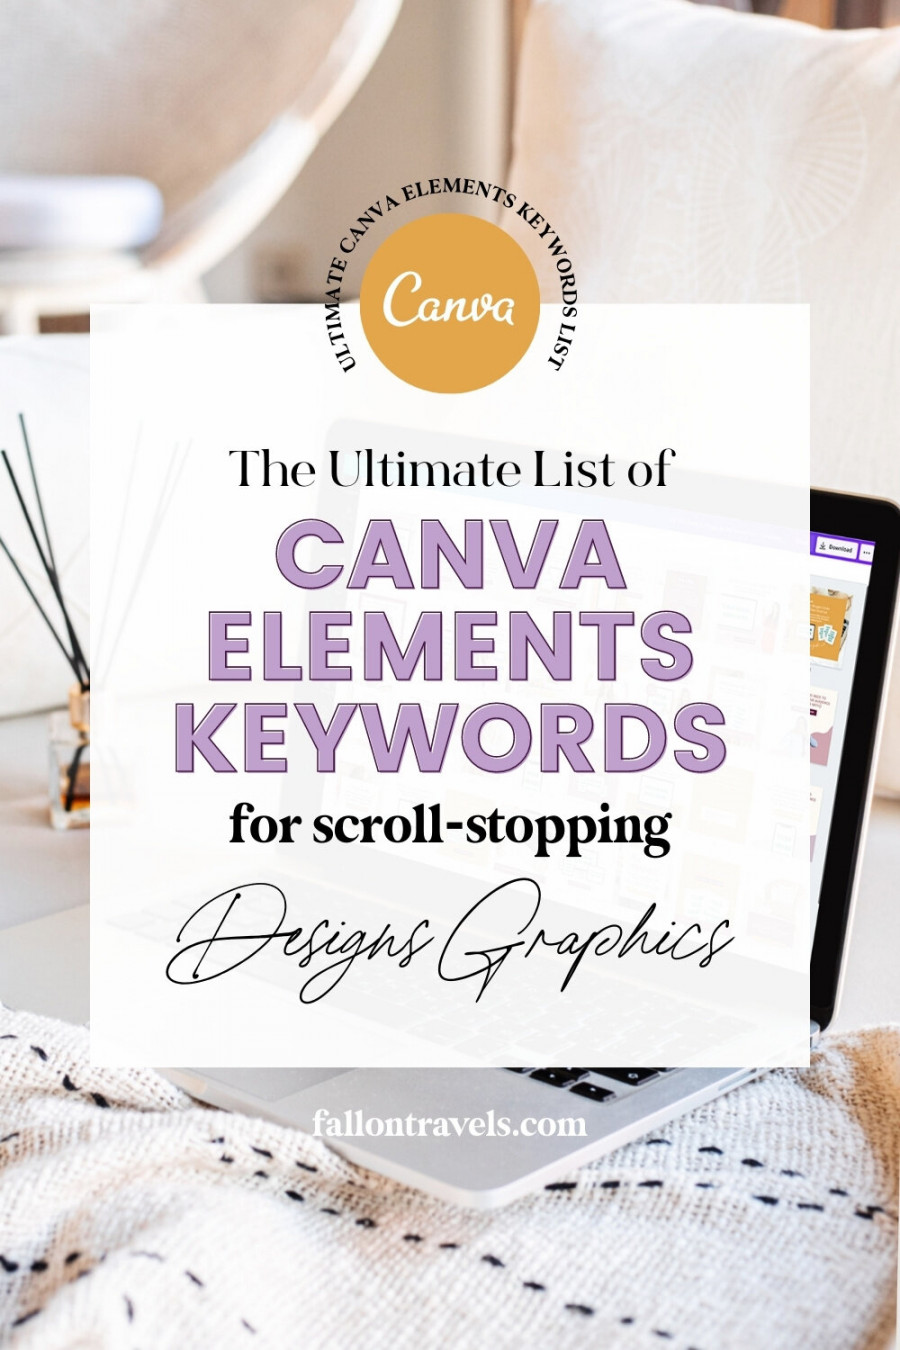 + Canva Elements Keywords for Aesthetic Designs: The Ultimate